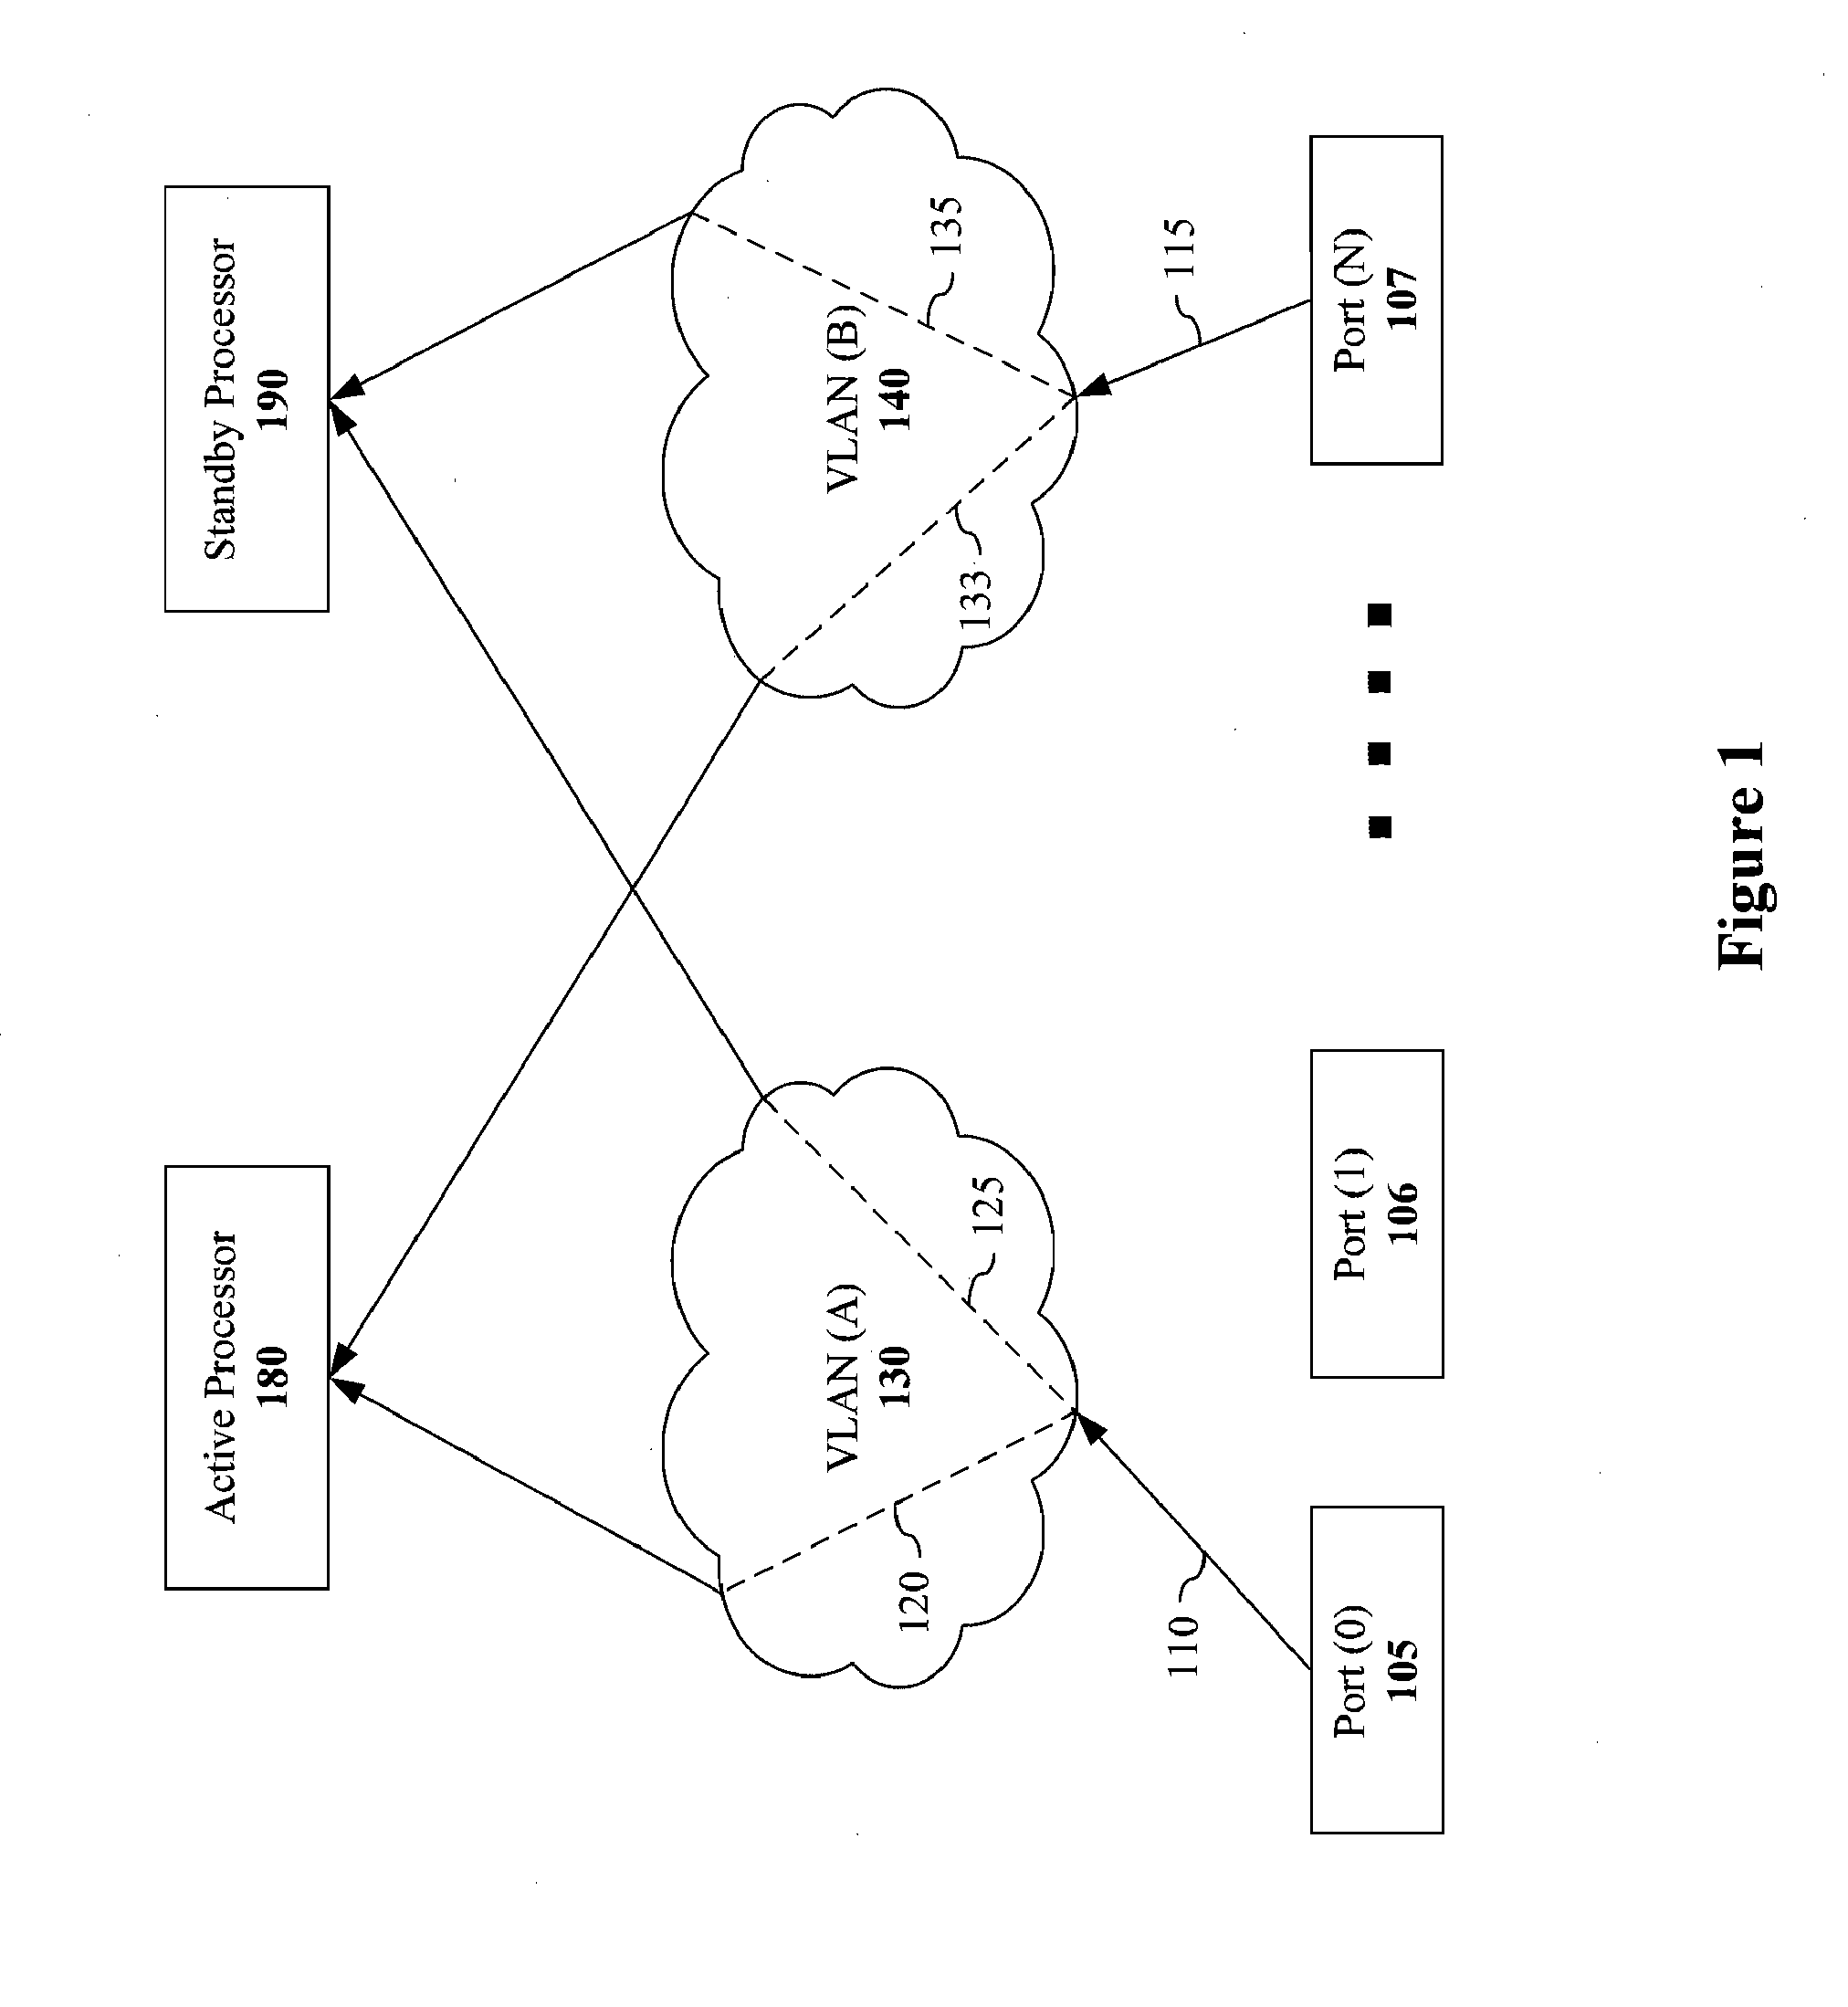 Virtual local area network configuration for multi-chassis network element